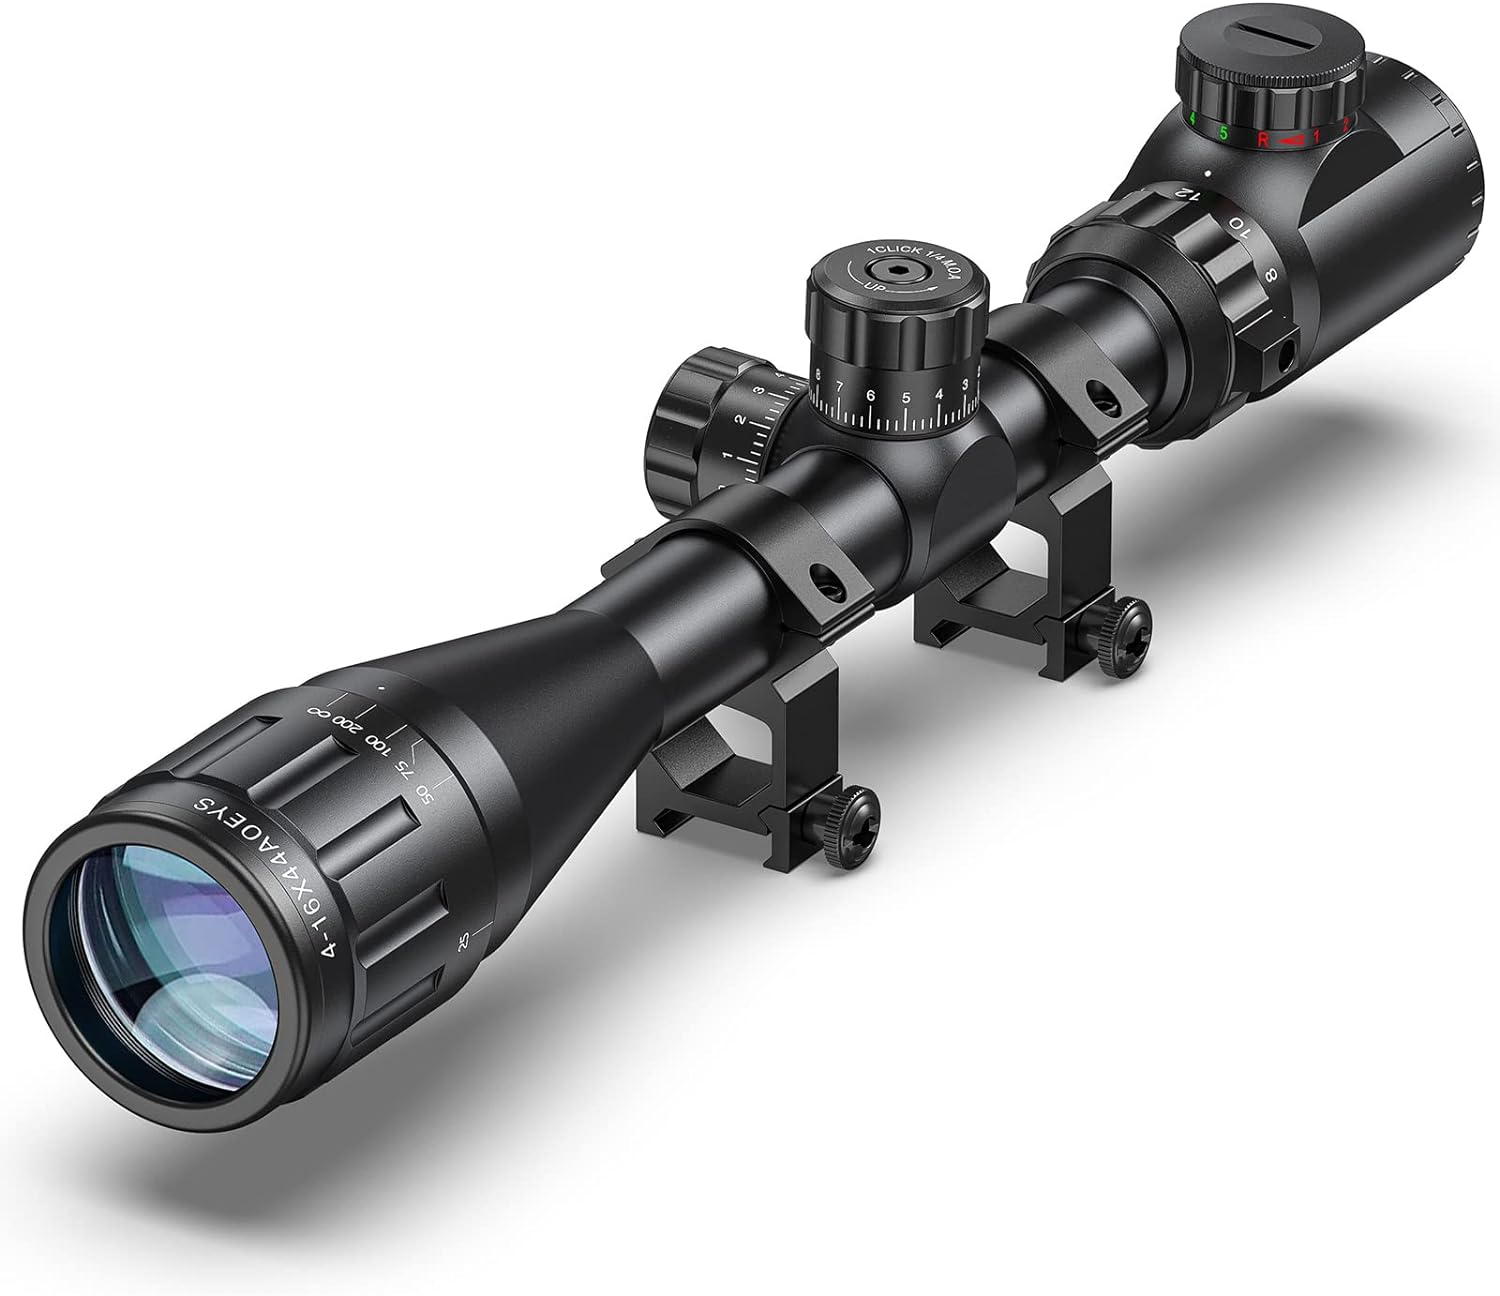 CVLIFE 4-16x44 Tactical Rifle Scope Red and Green Illuminated Built Gun Scope with Locking Turret Sunshade and Mount Included - CVLIFE 4-16x44 Tactical Rifle Scope Review